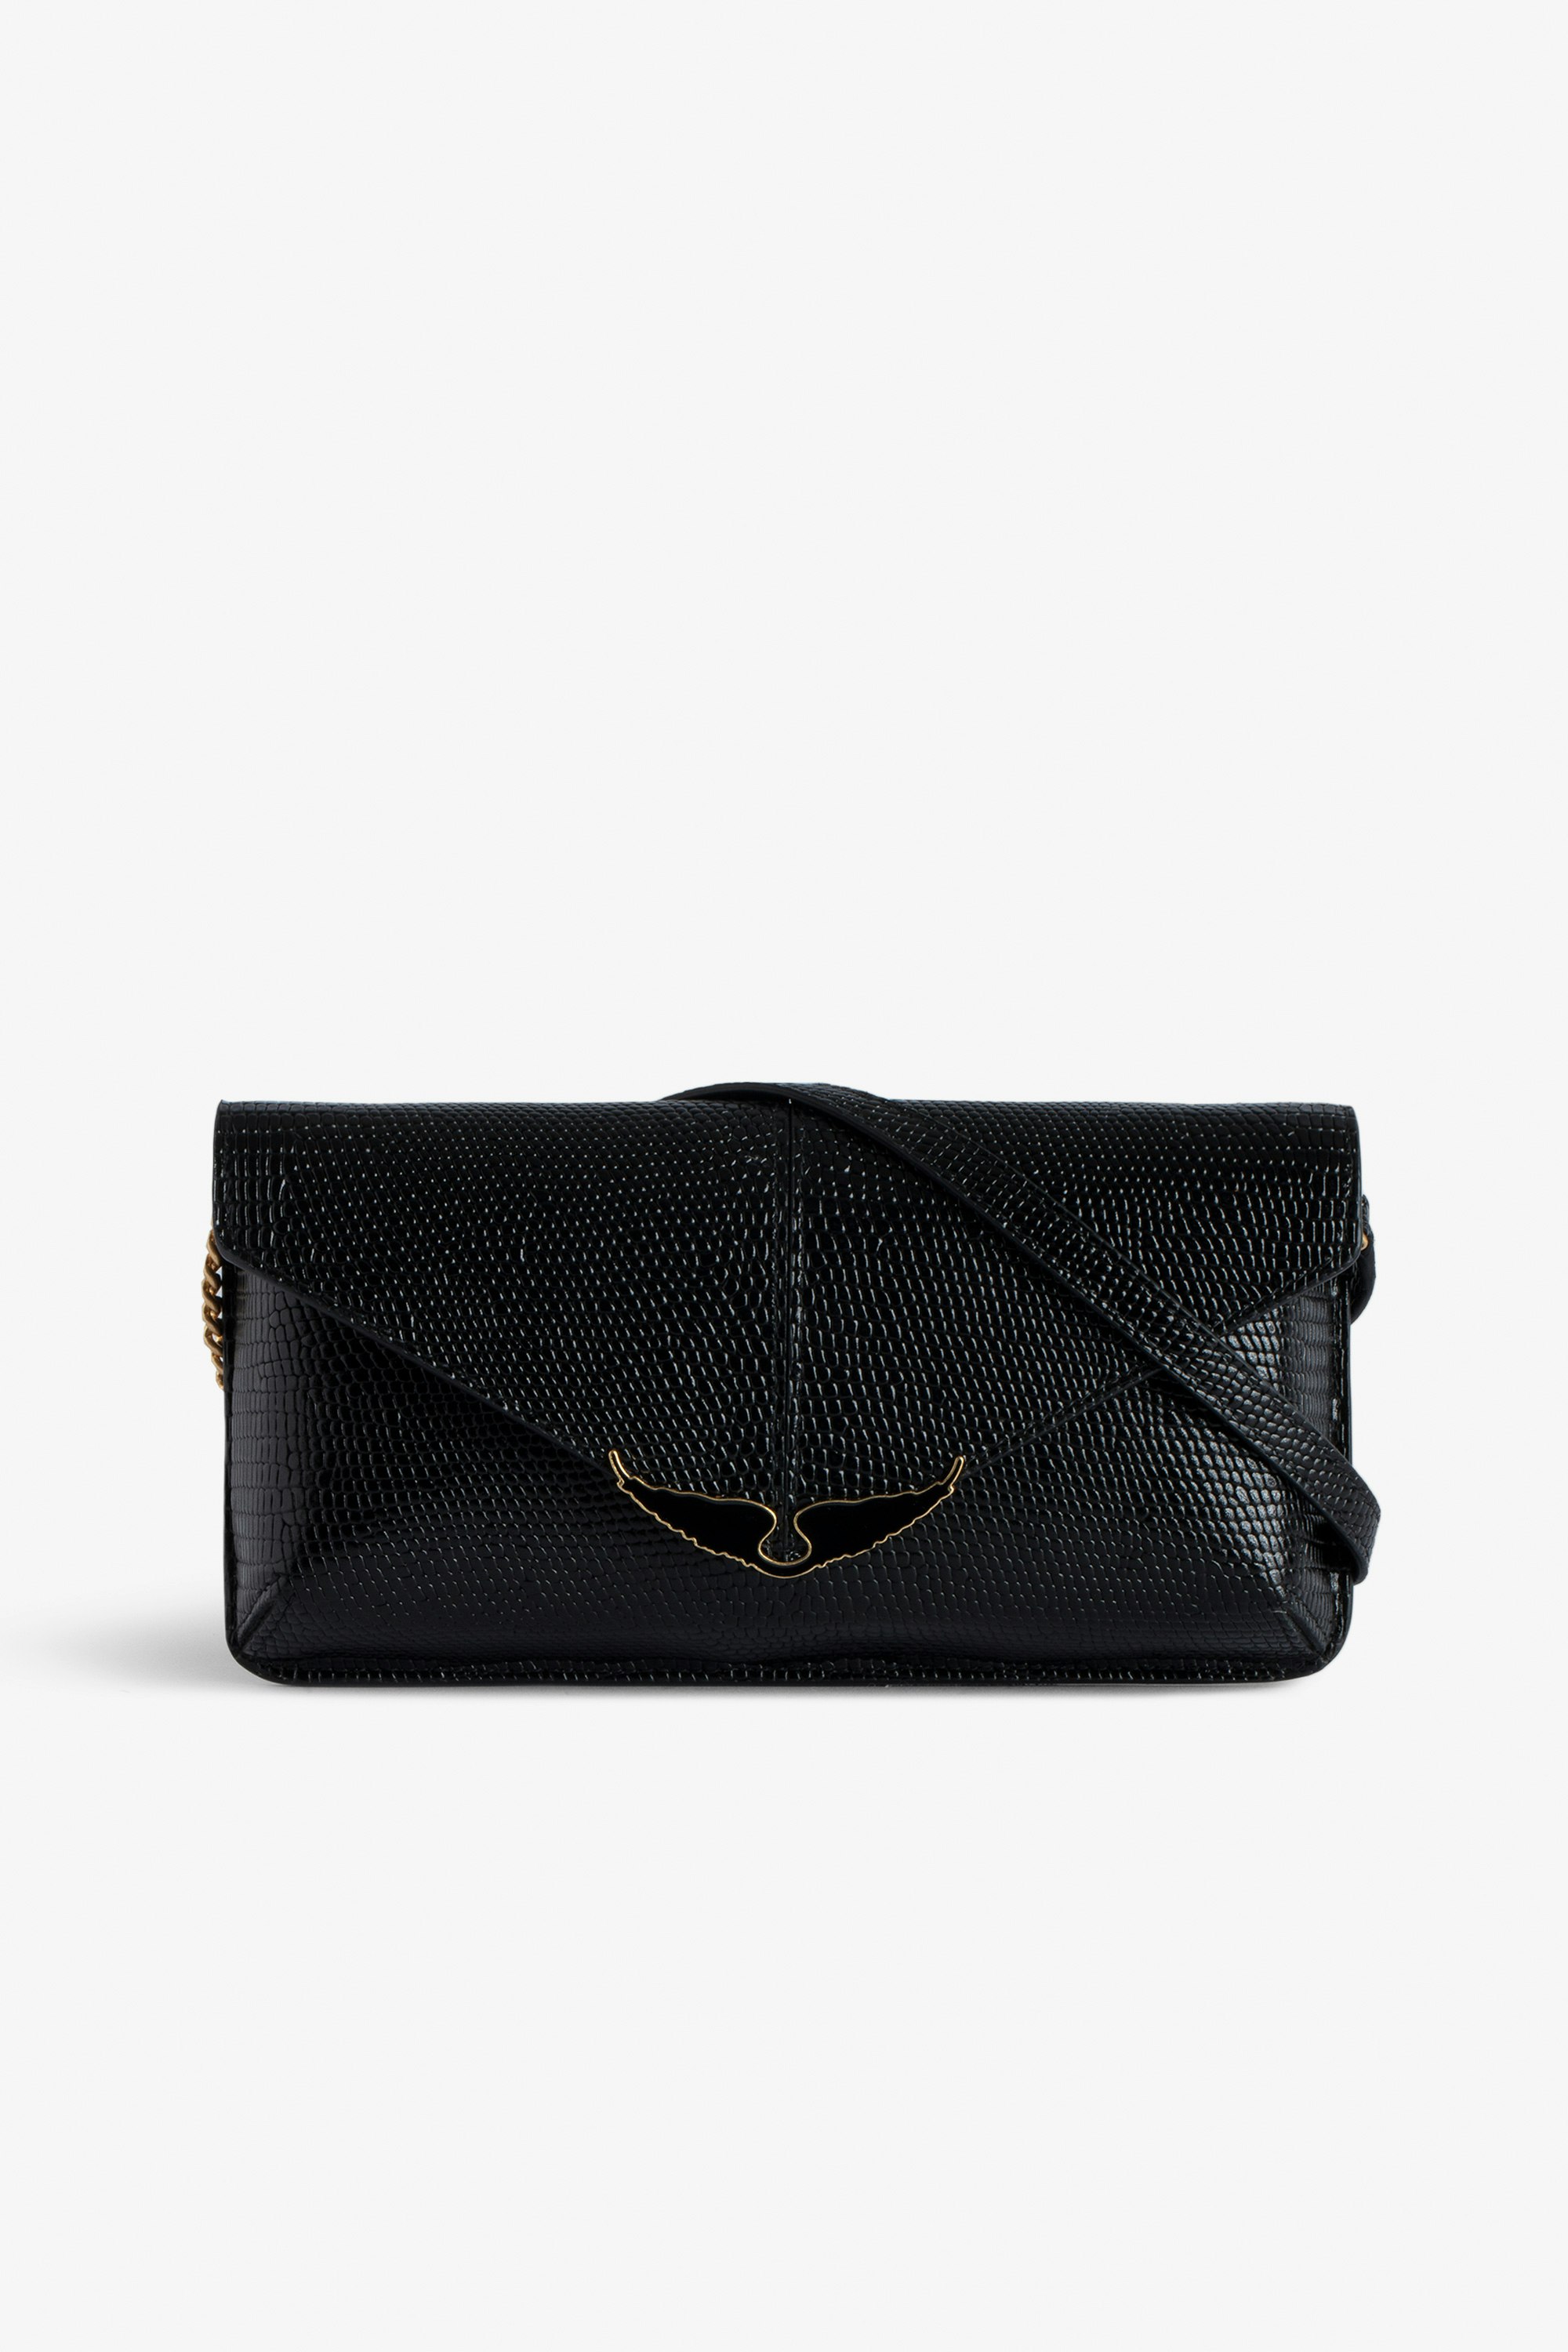 Borderline Embossed Clutch - Women’s black iguana-embossed leather clutch with shoulder strap with wings charm.